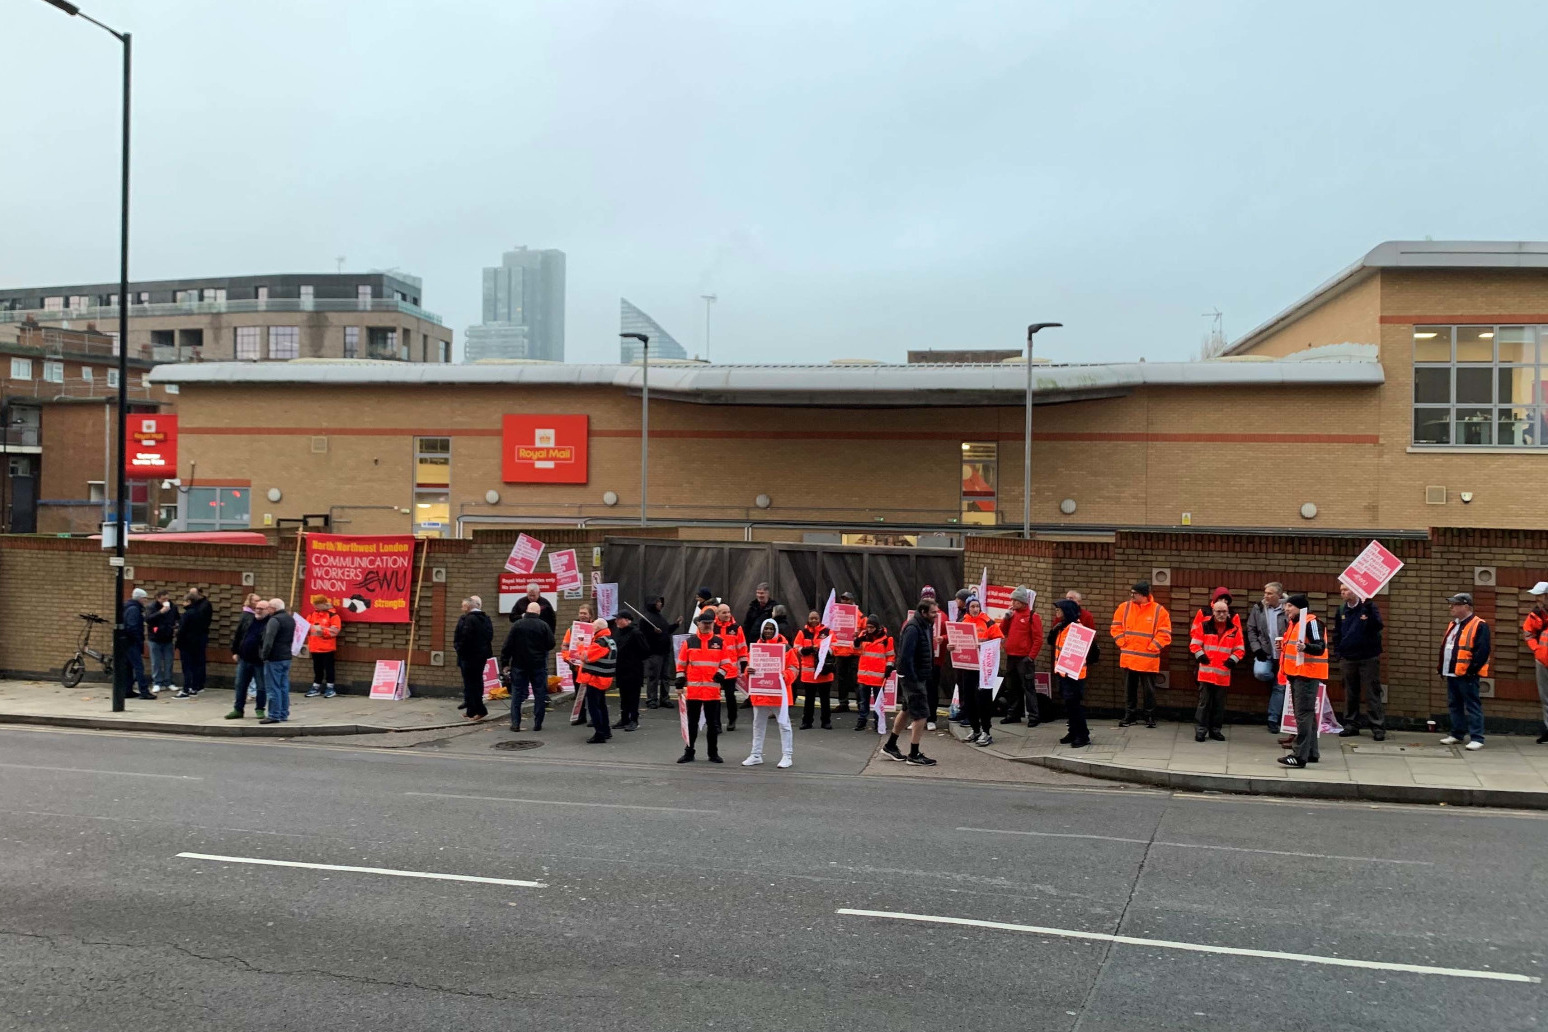 Postal workers take further day of strike action in increasingly bitter dispute 